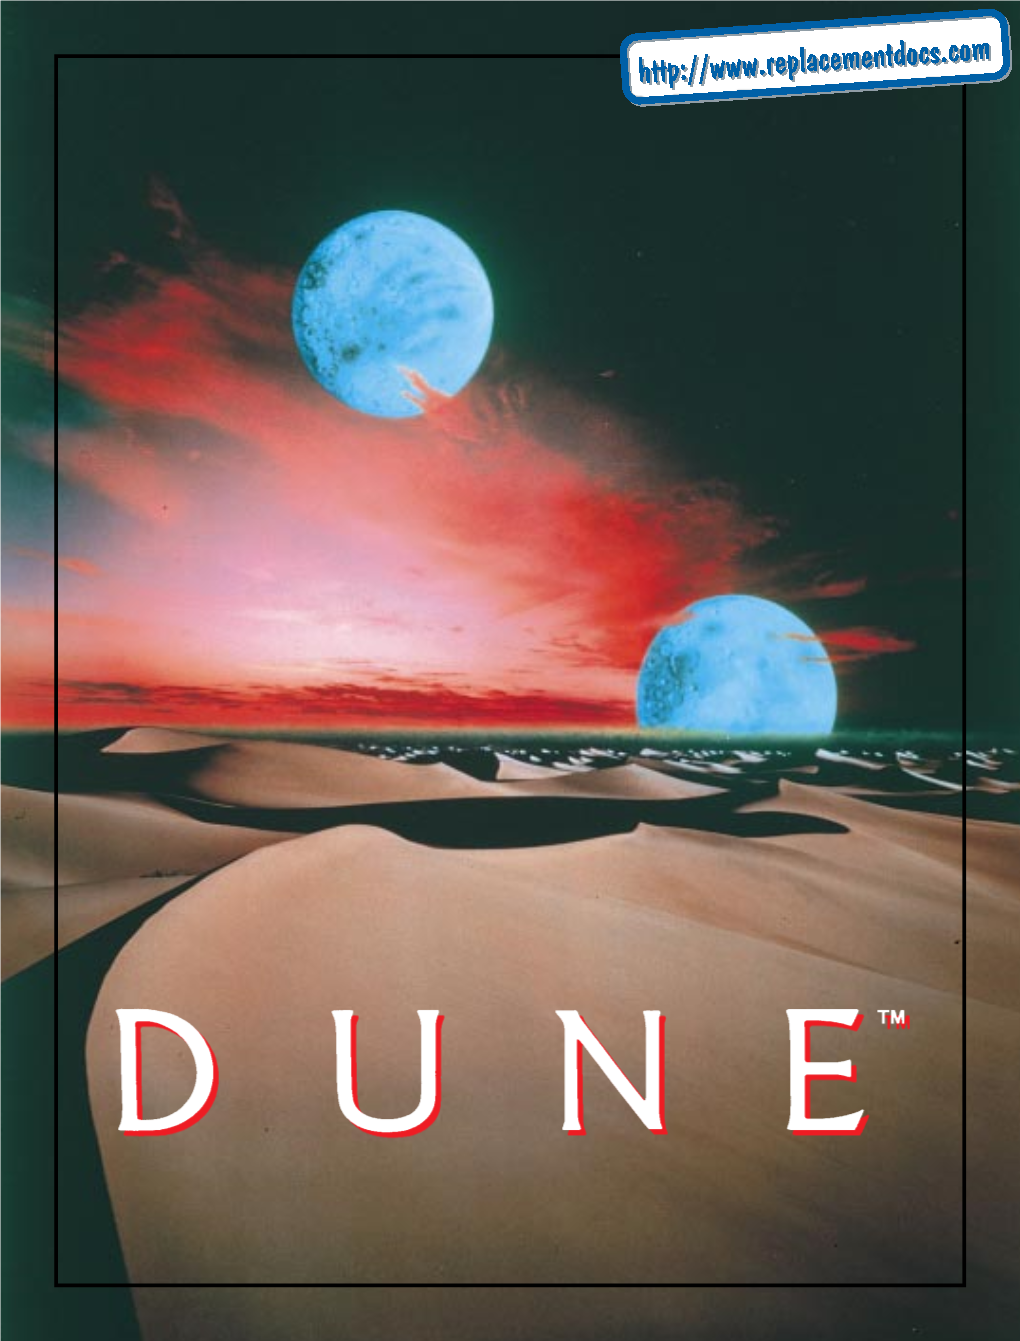 Dune Eng 26/8/97 11:16 Am Page 1 Dune Eng 26/8/97 11:16 Am Page 2